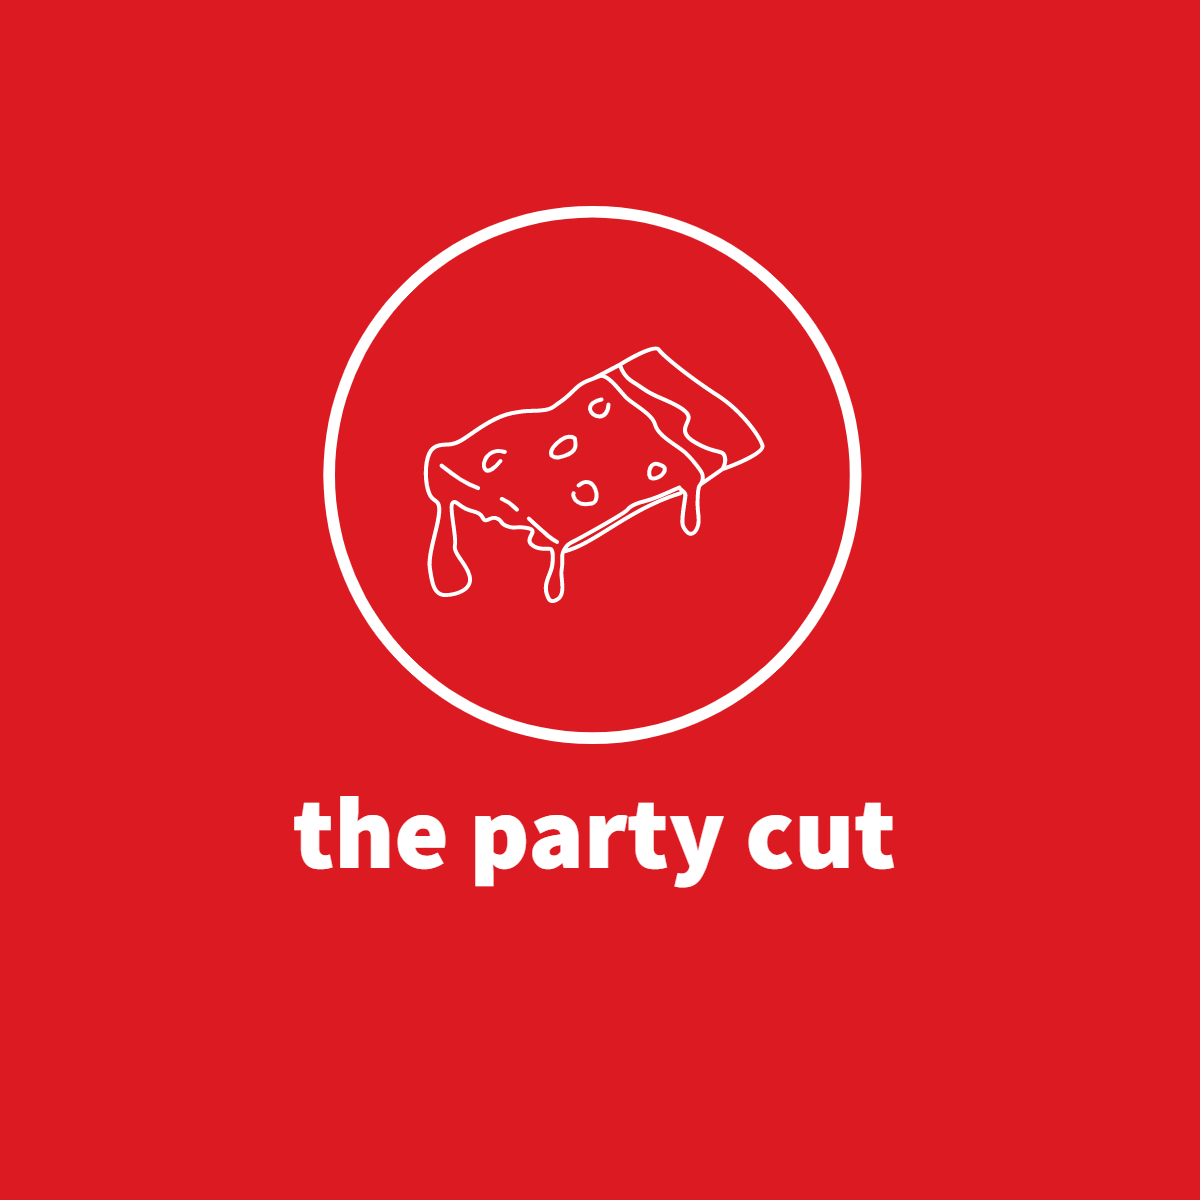 Artwork for The Party Cut